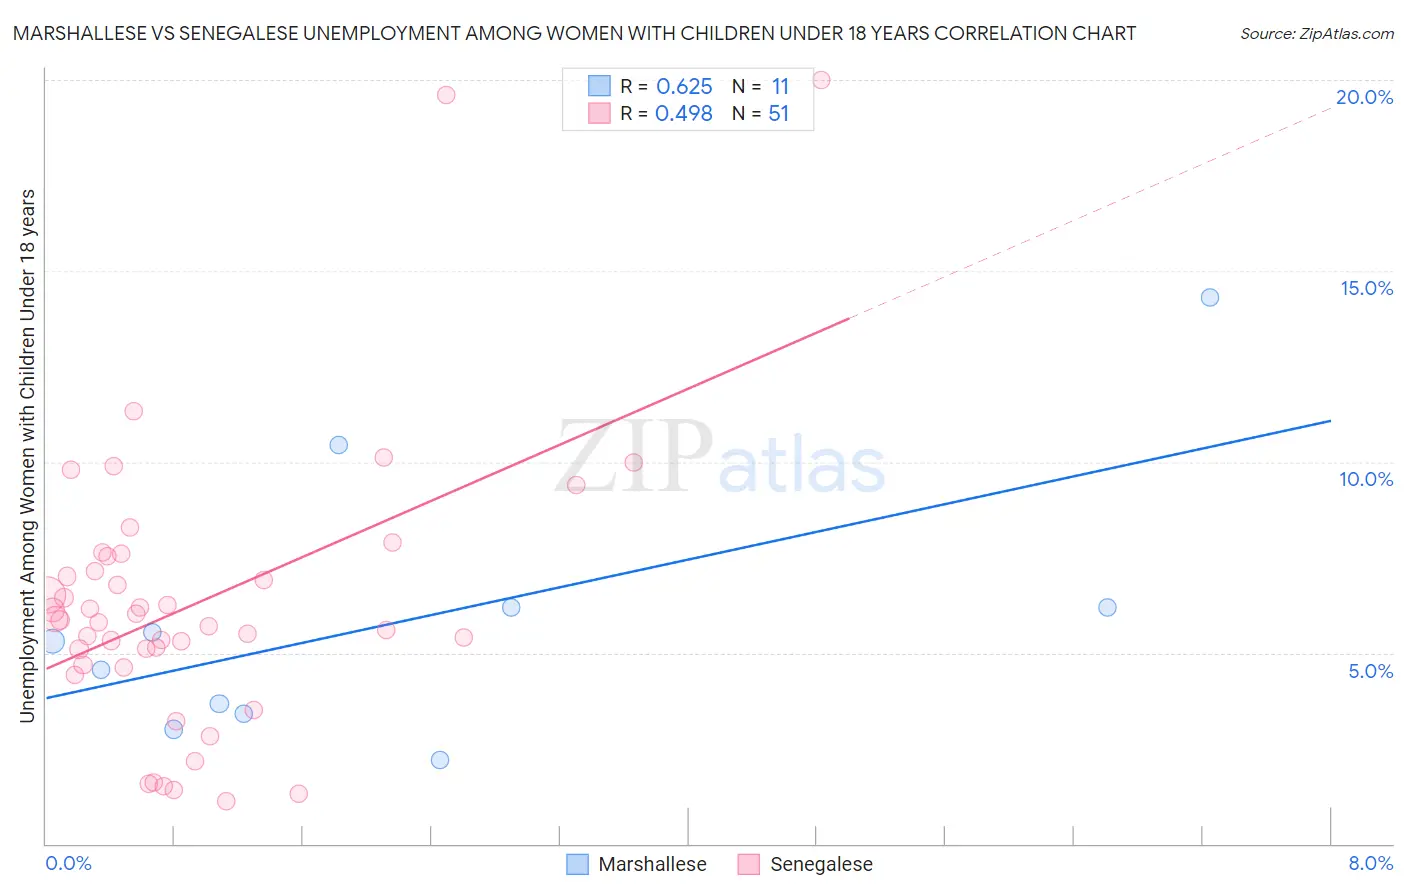 Marshallese vs Senegalese Unemployment Among Women with Children Under 18 years